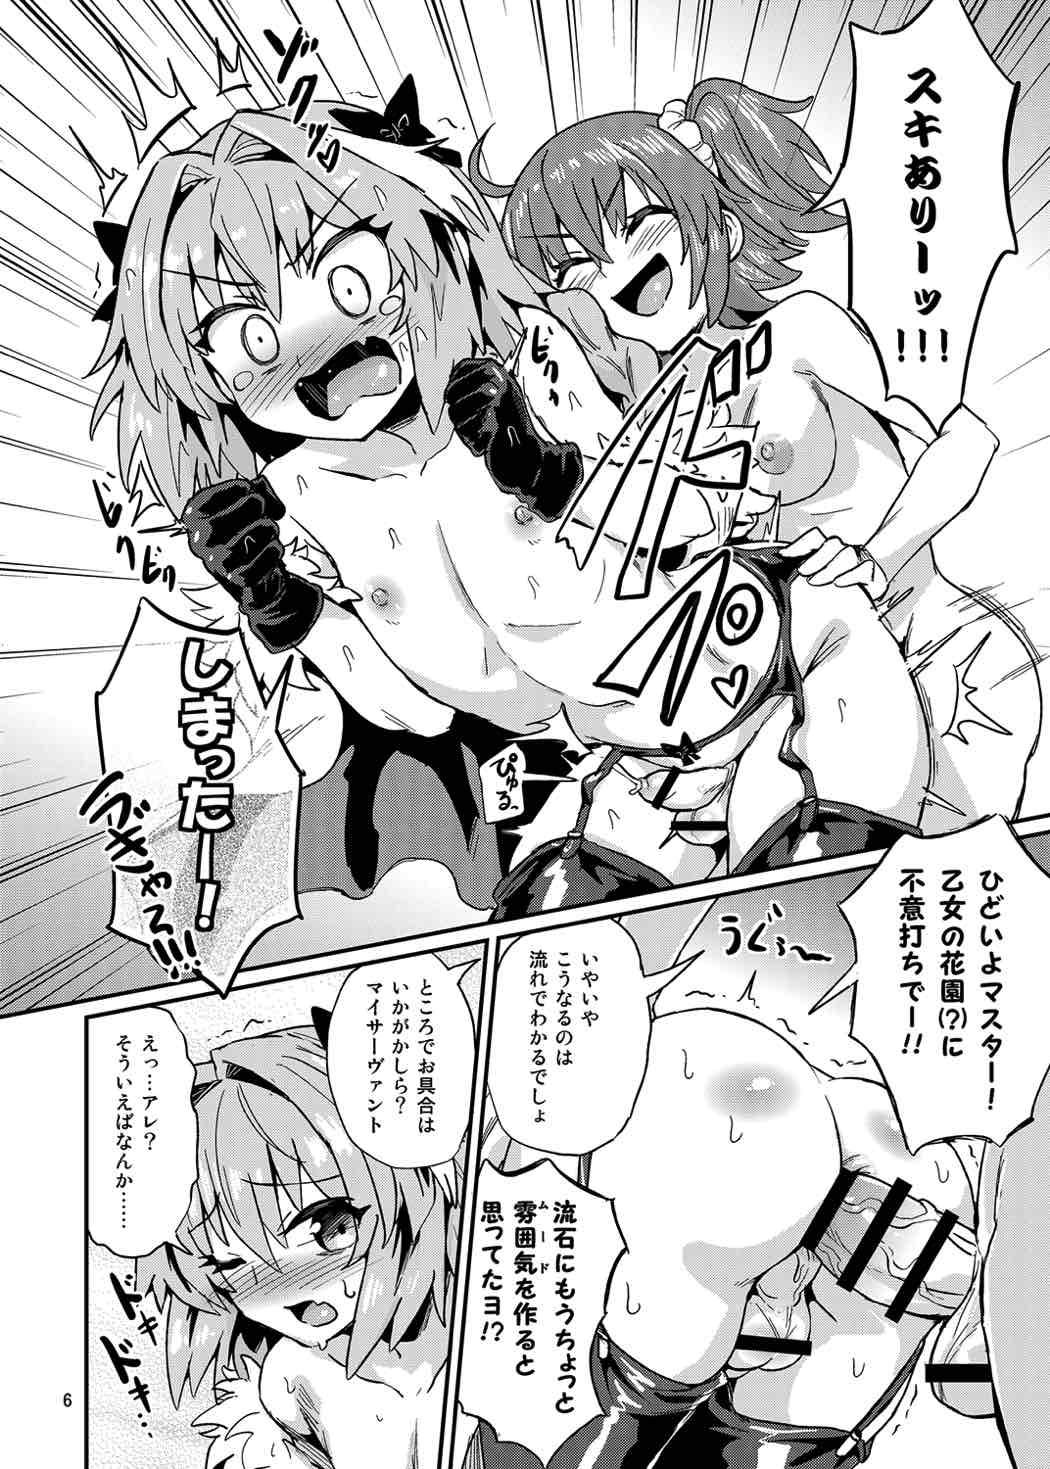 Camporn ASSHorufo-kun - Fate grand order Guys - Page 5